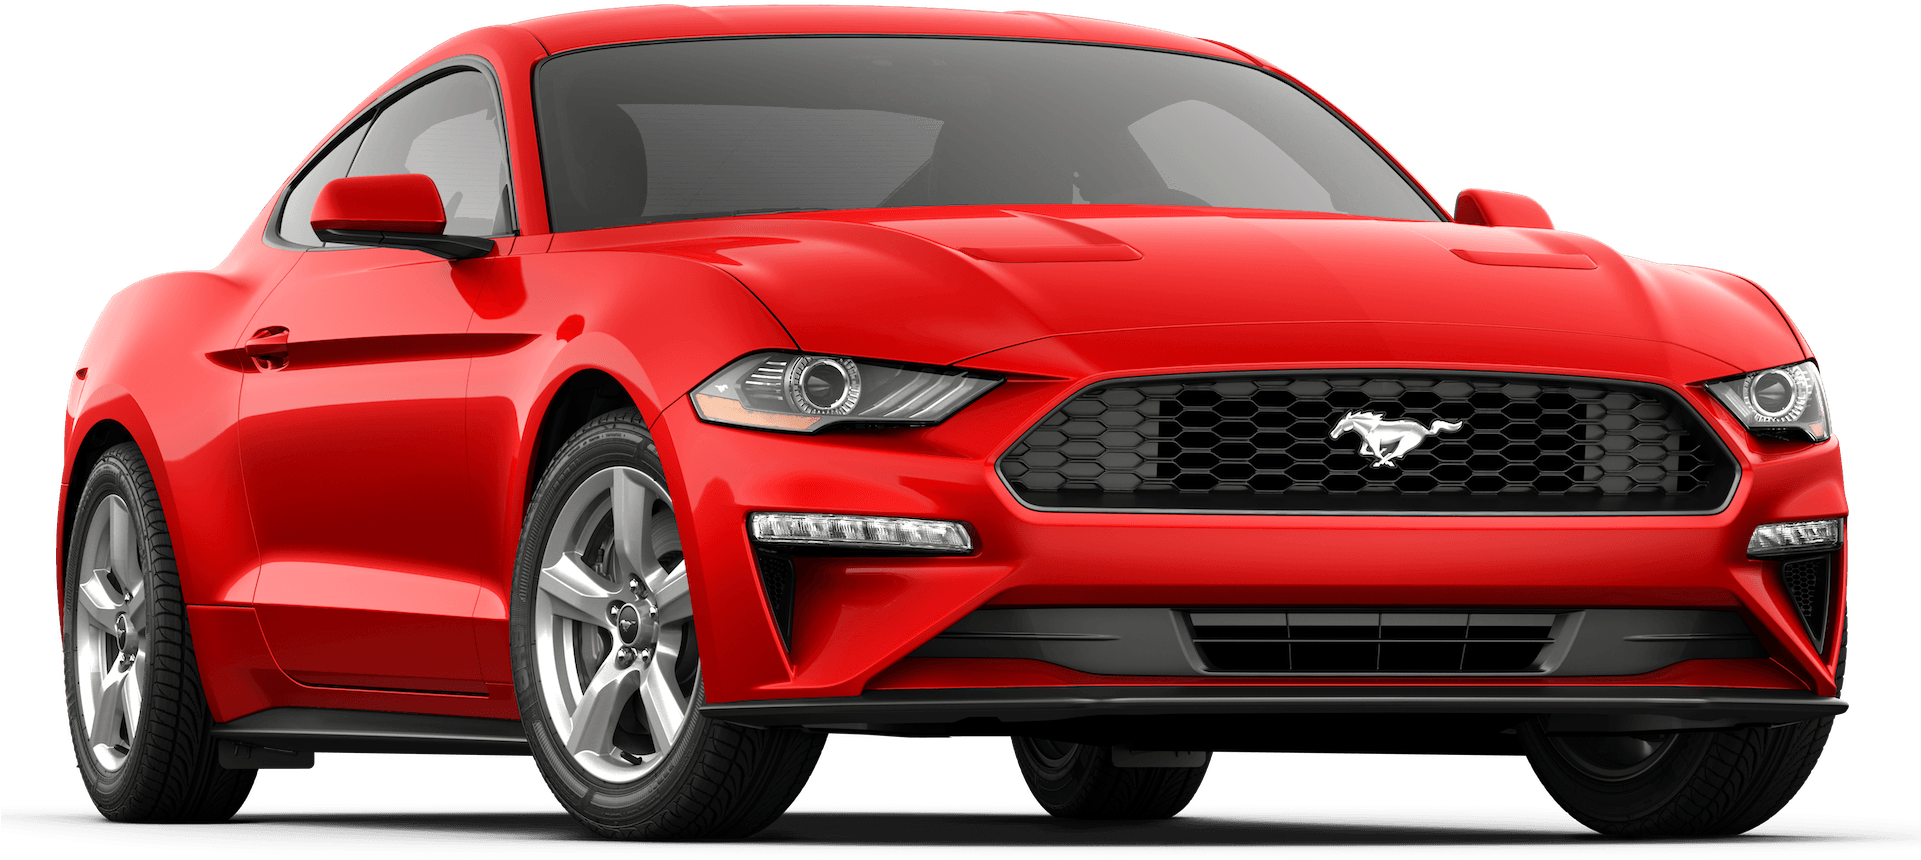 Ford Mustang Transparent Background